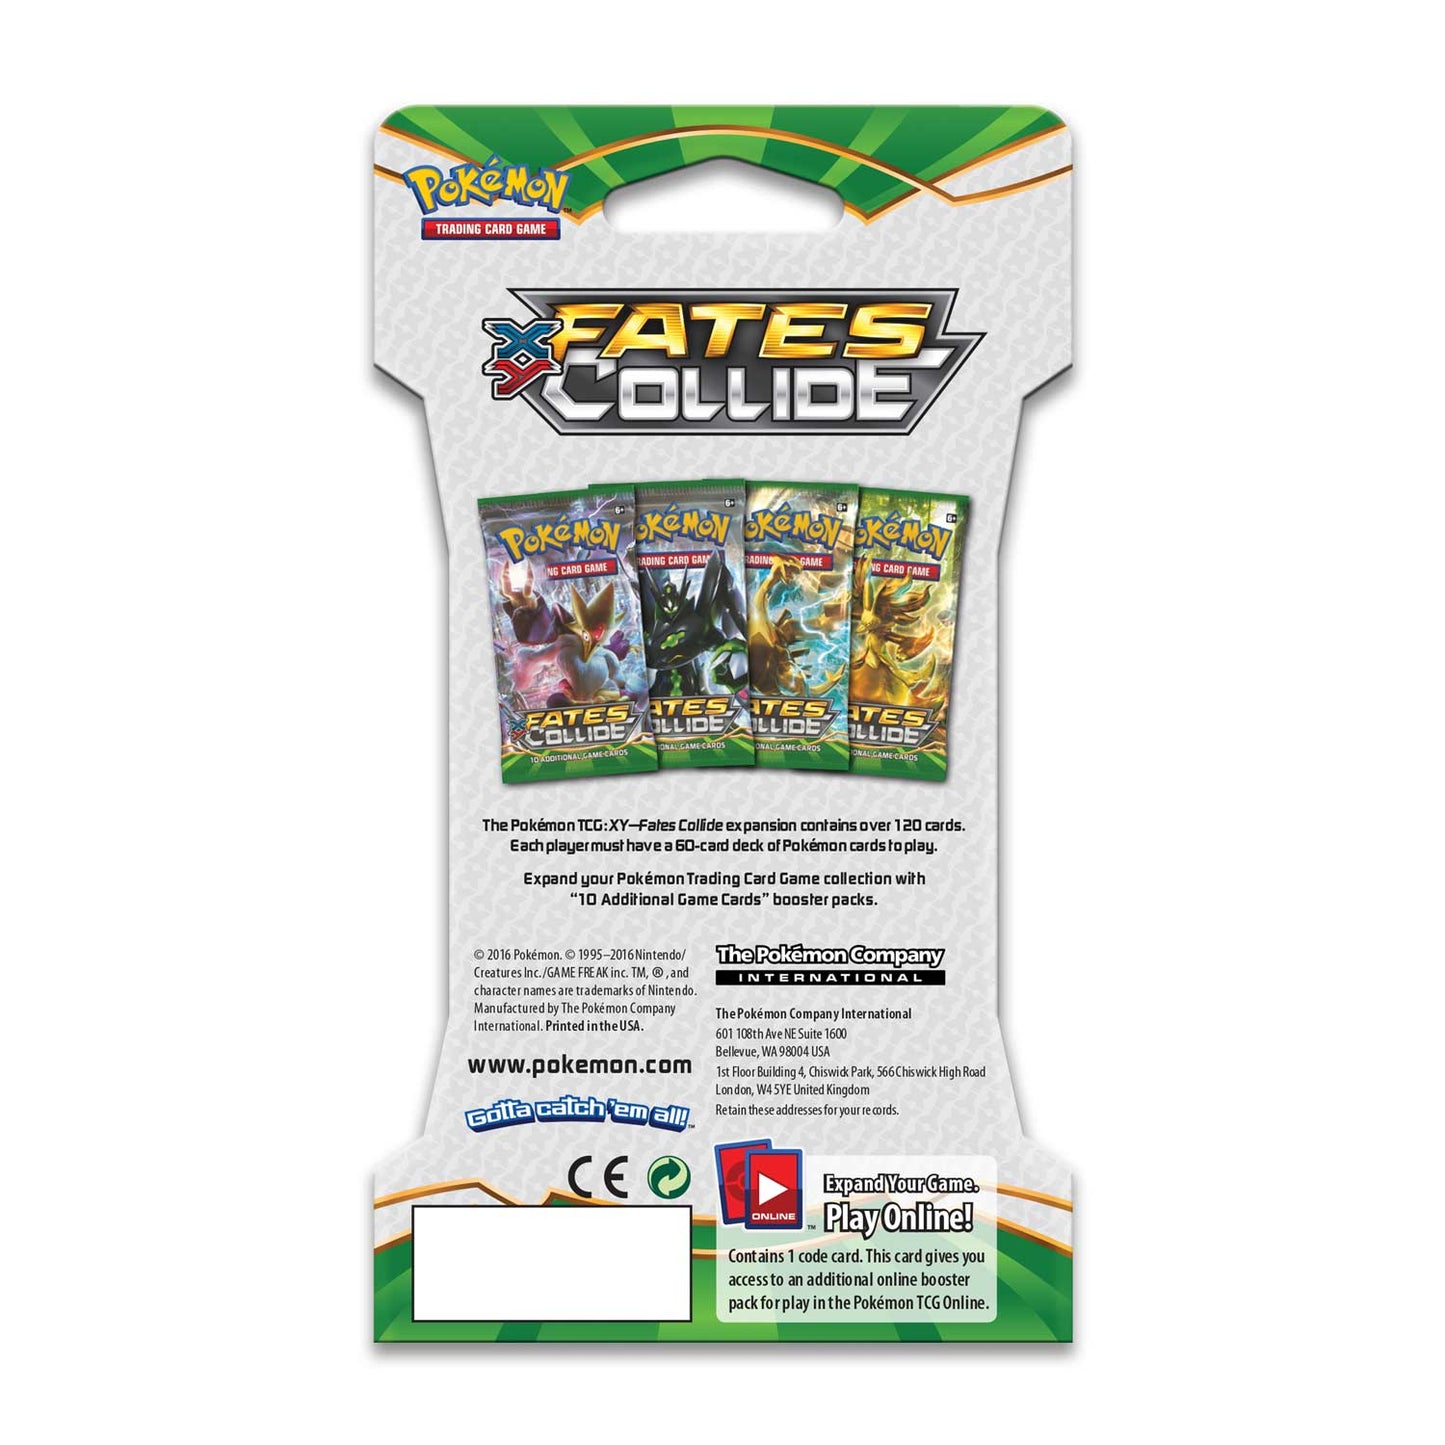 POKÉMON - FATES COLLIDE - BOOSTER PACK BLISTER / SLEEVED - XY